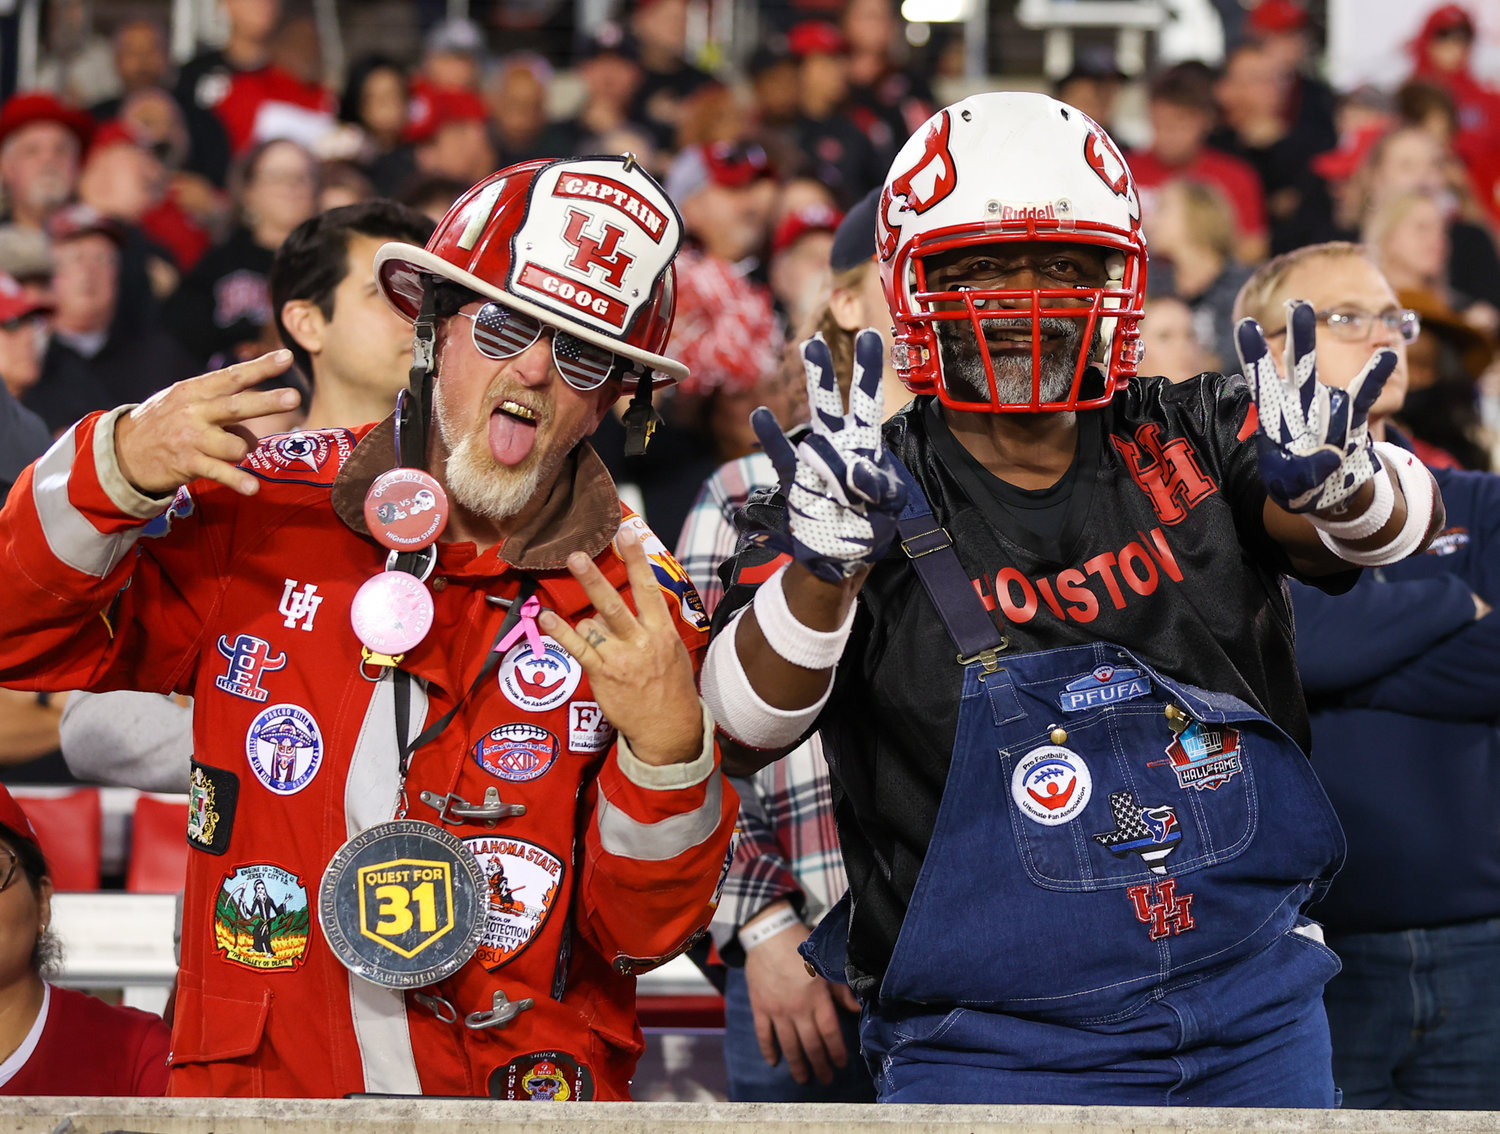 Houston Cougars fans during an NCAA football game between Houston and SMU on October 30, 2021 in Houston, Texas.